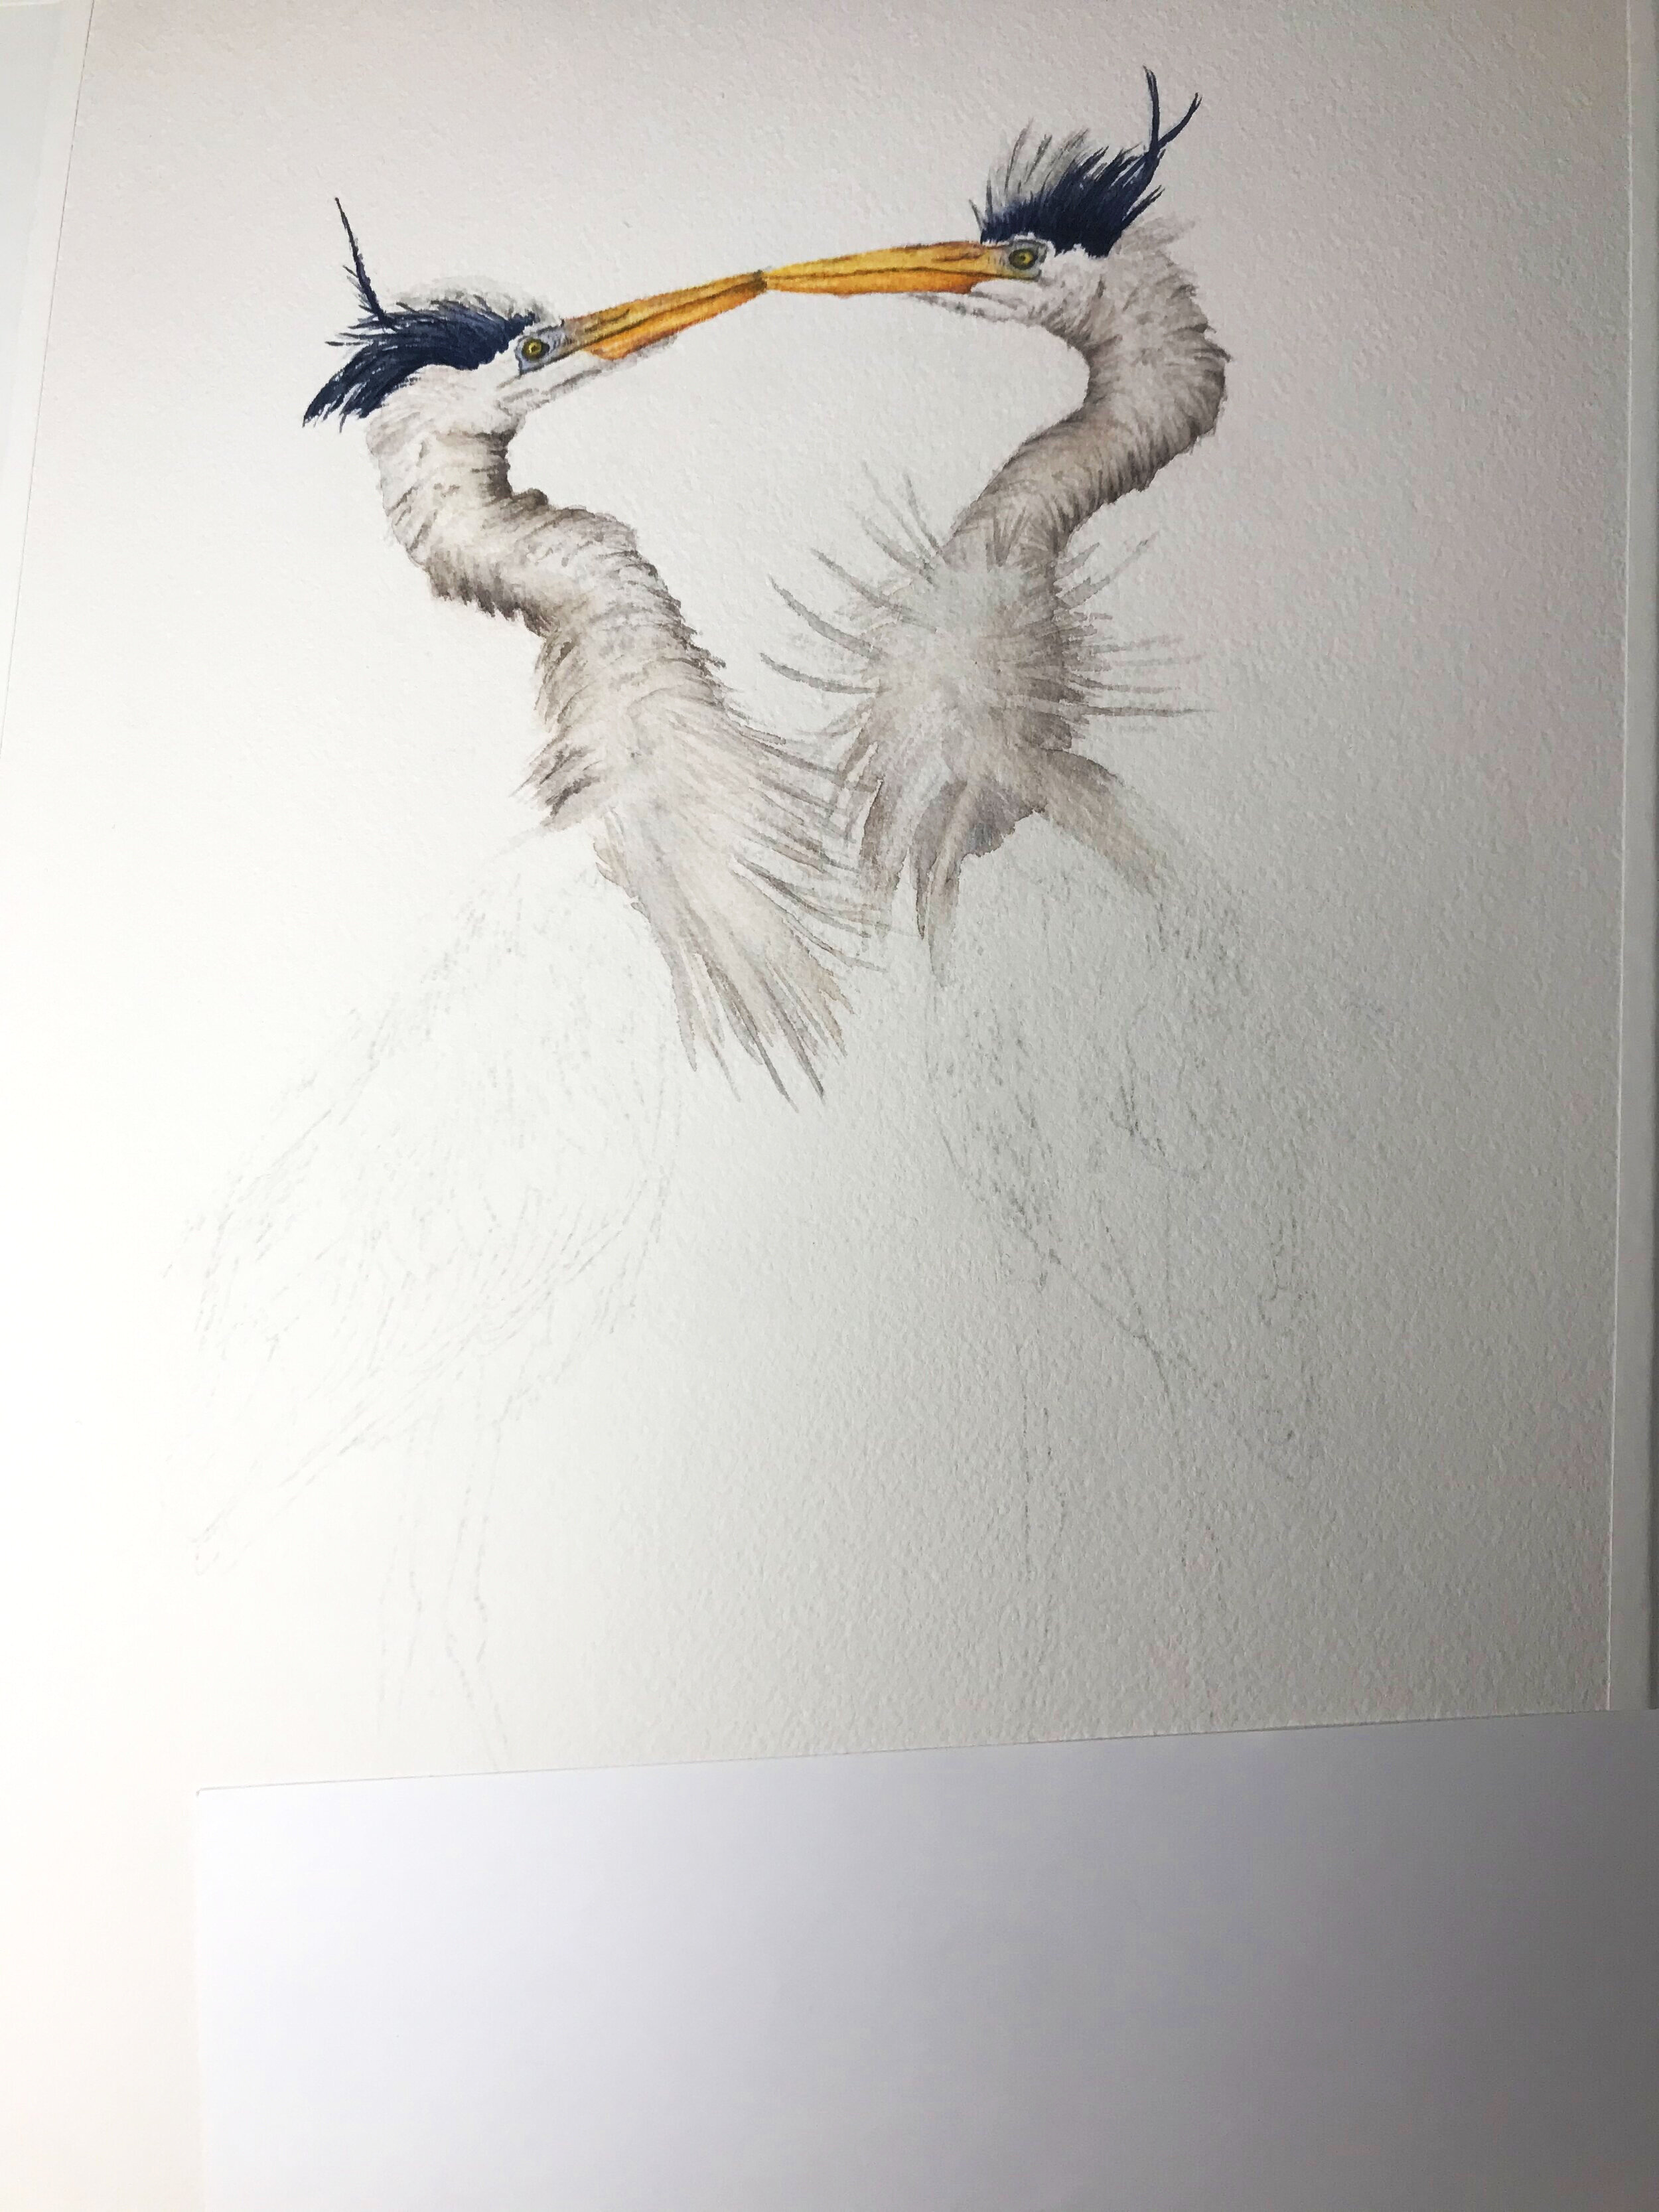 Painting Two Great Blue Herons